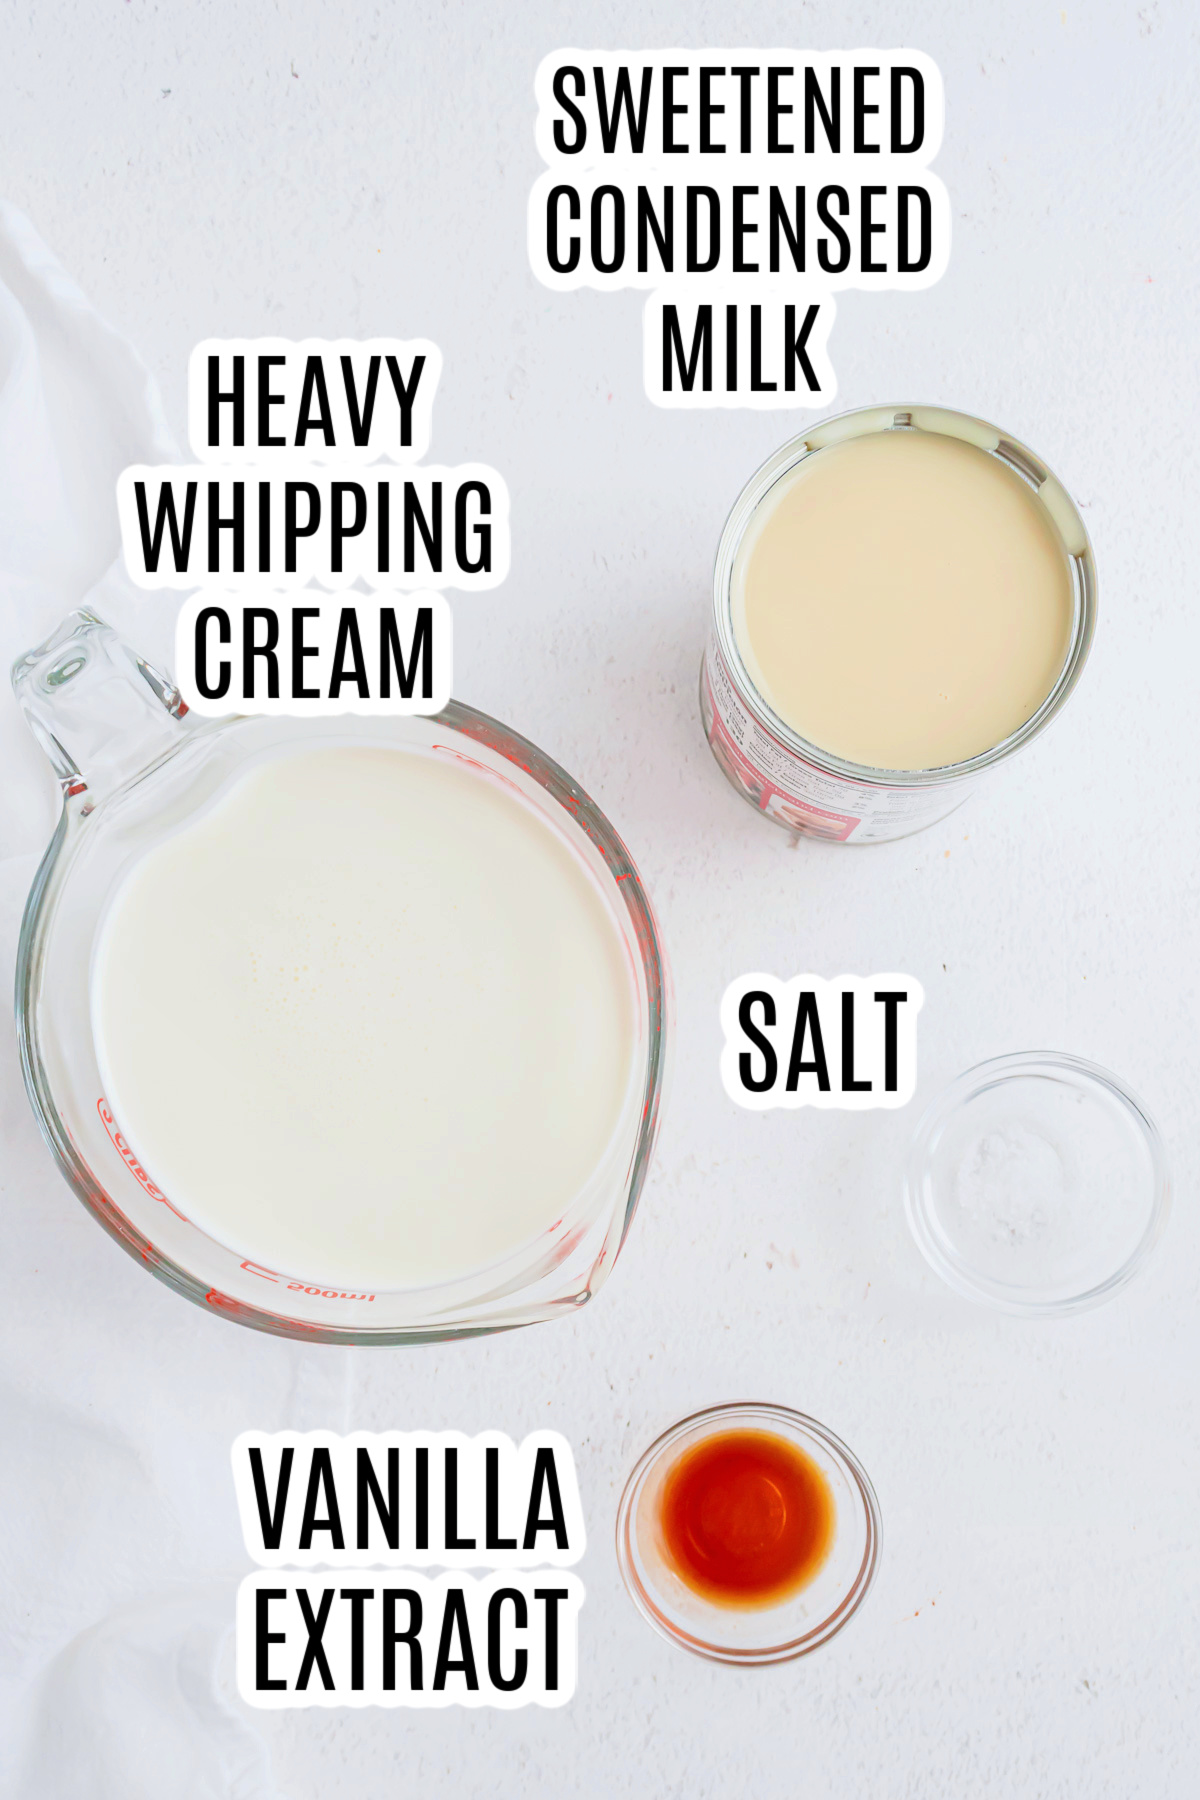 The ingredients needed to make this no churn ice cream recipe include: sweetened condensed milk, heavy whipping cream, salt and vanilla extract.